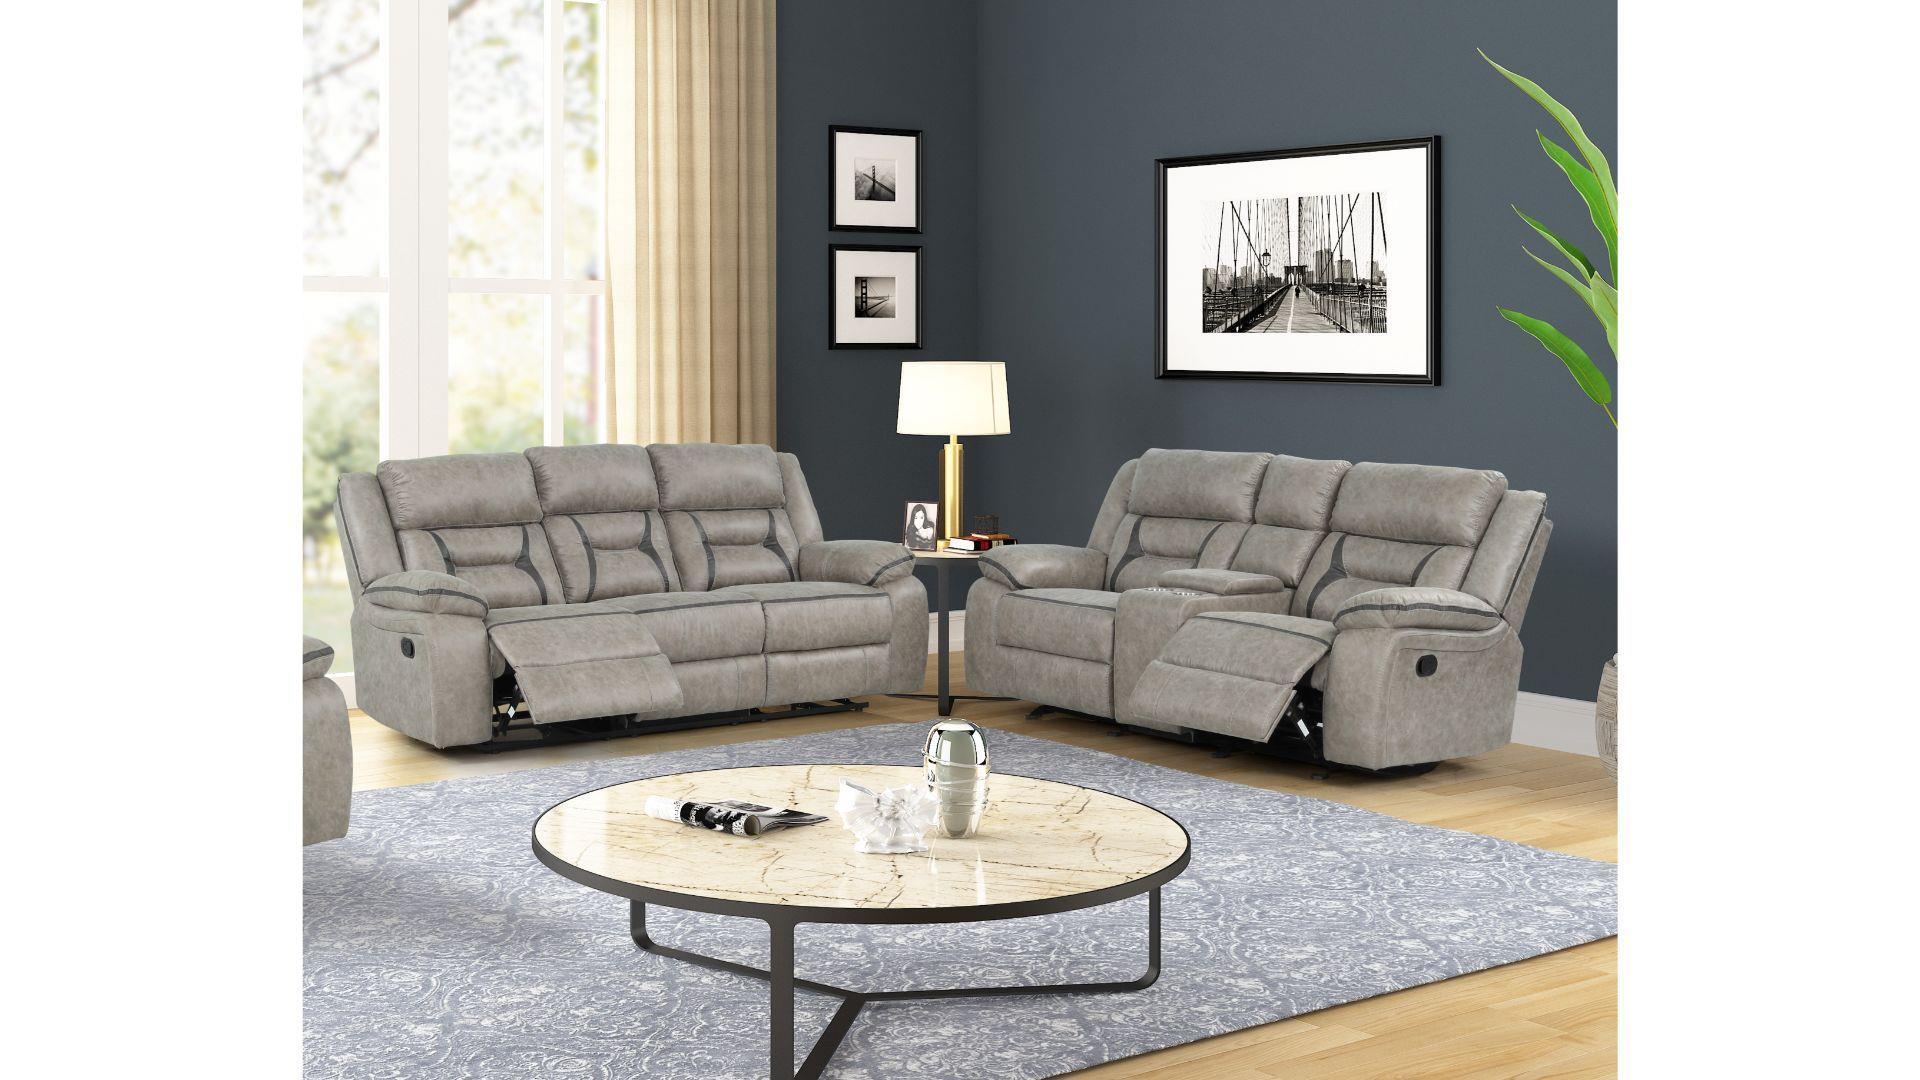 Contemporary, Modern Recliner Sofa Set DENALI 698781420461-2PC in Gray Faux Leather